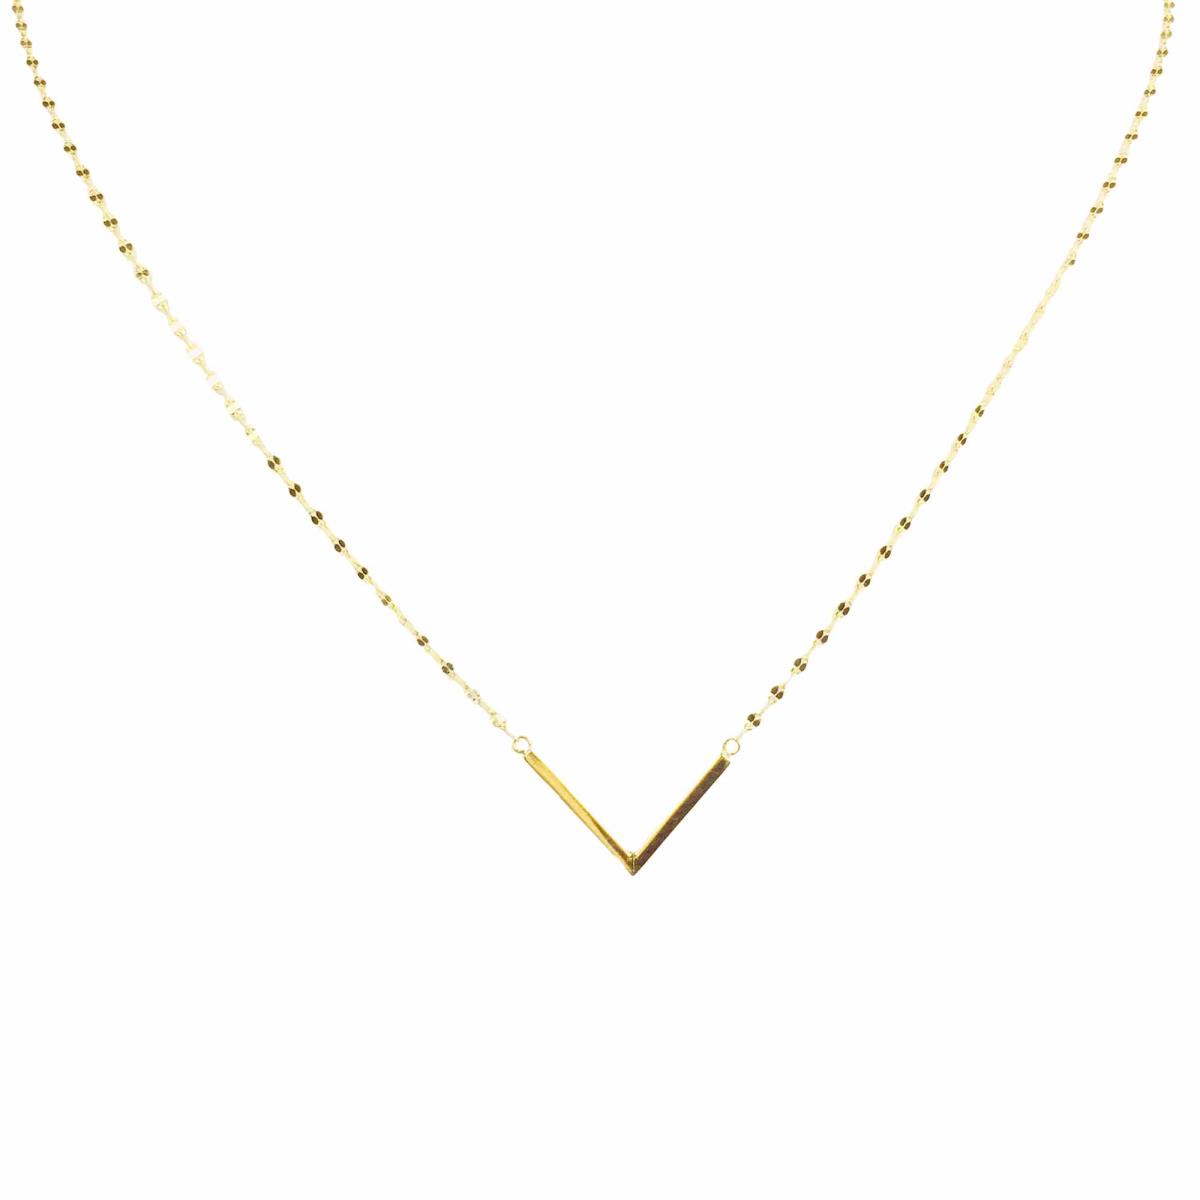 14K Yellow Gold DC Twist "V" Shaped 18" Necklace